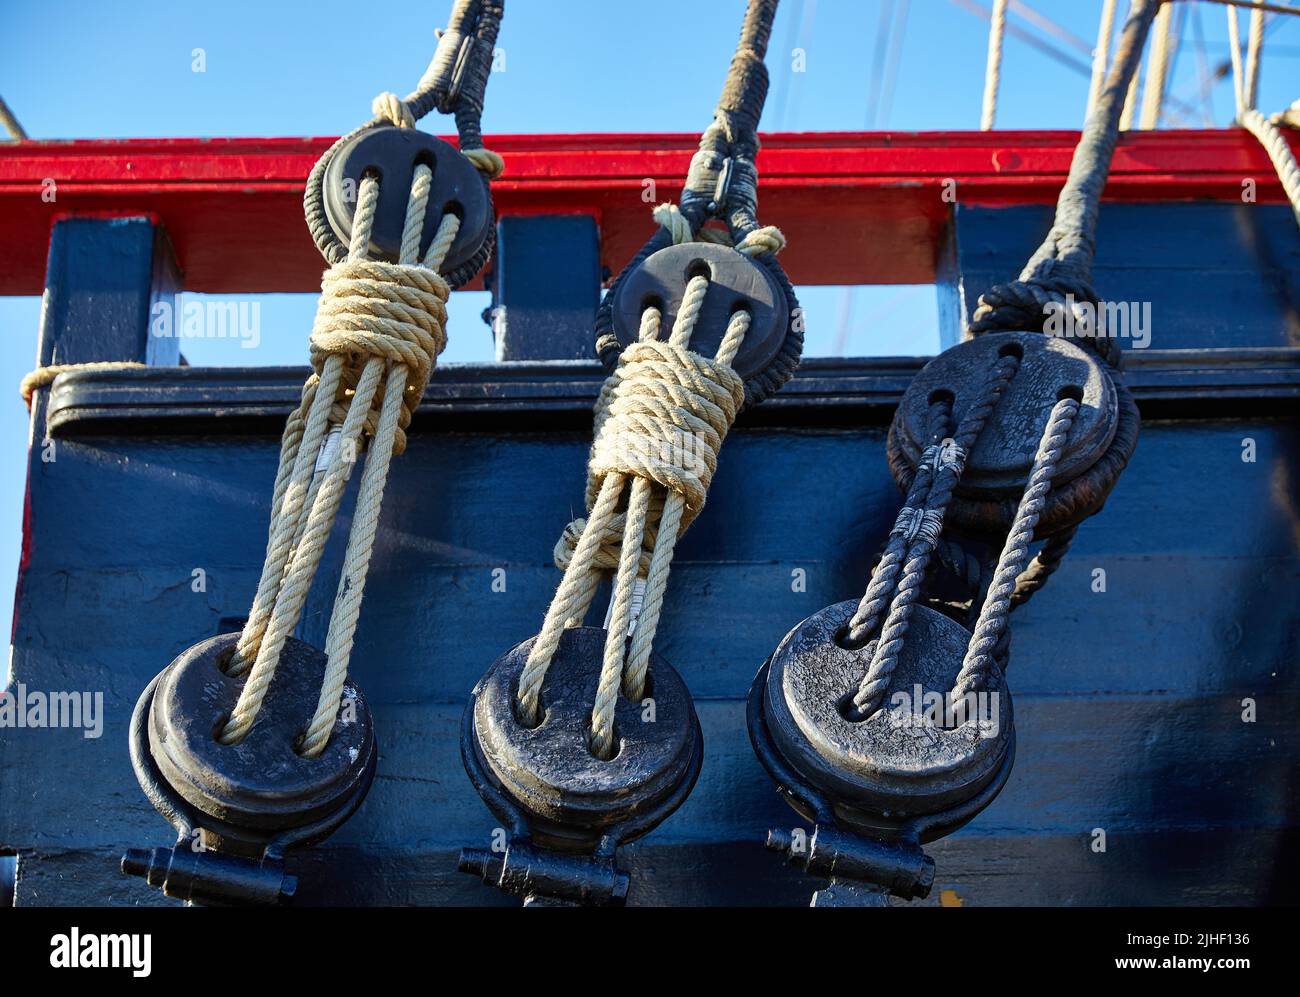 Abtract image of shrouds of a  square rigged ship Stock Photo